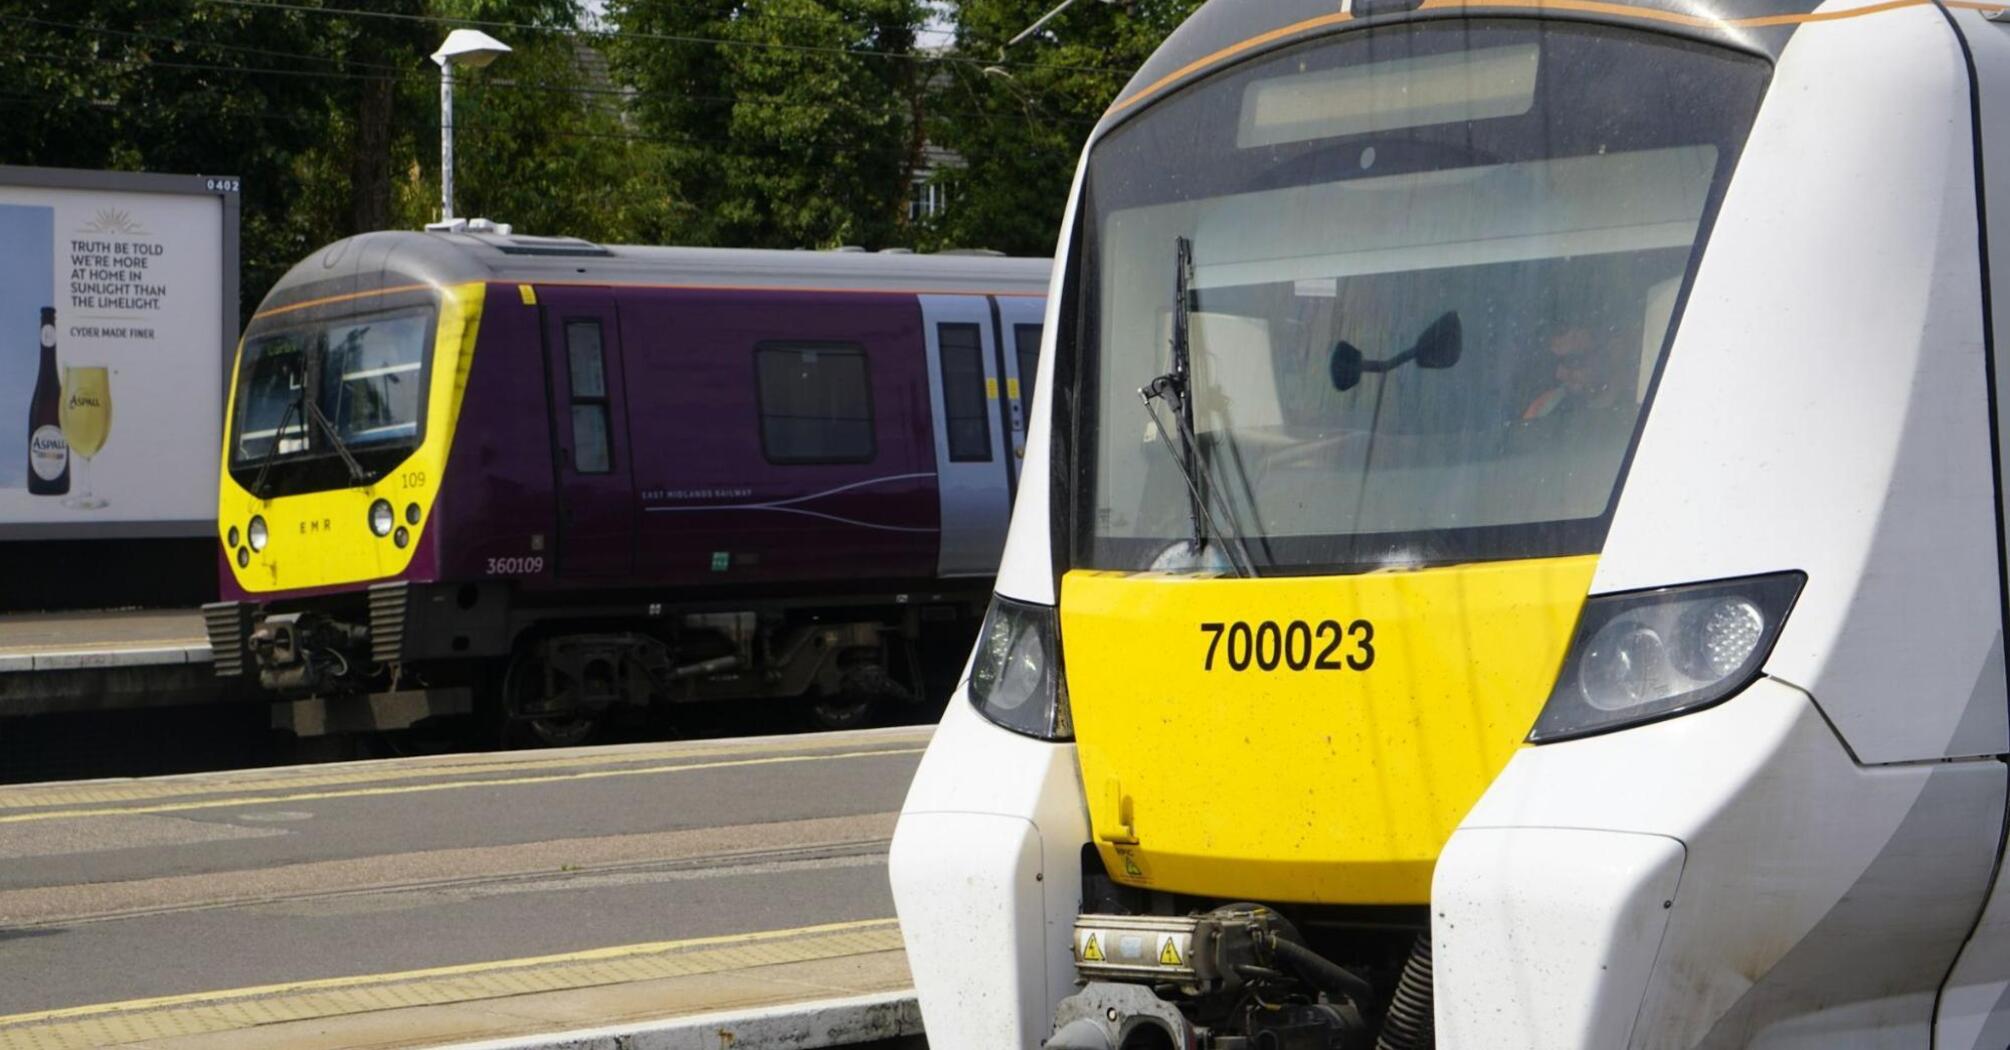 Two Thameslink trains on the station